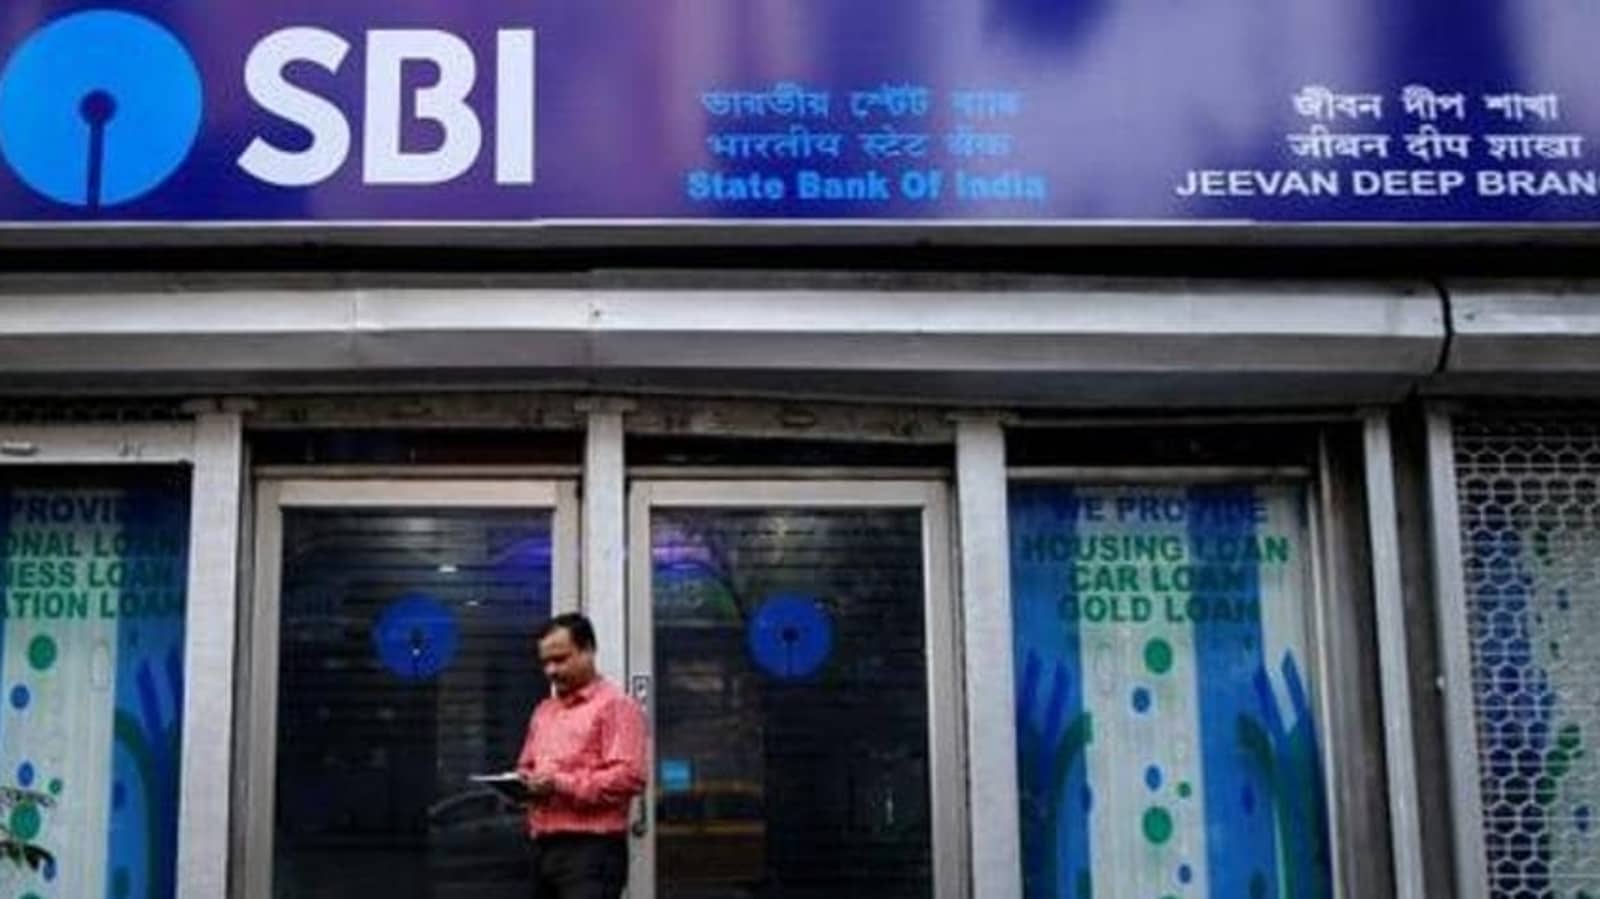 Banks in India will remain closed for 14 days in July. Details here